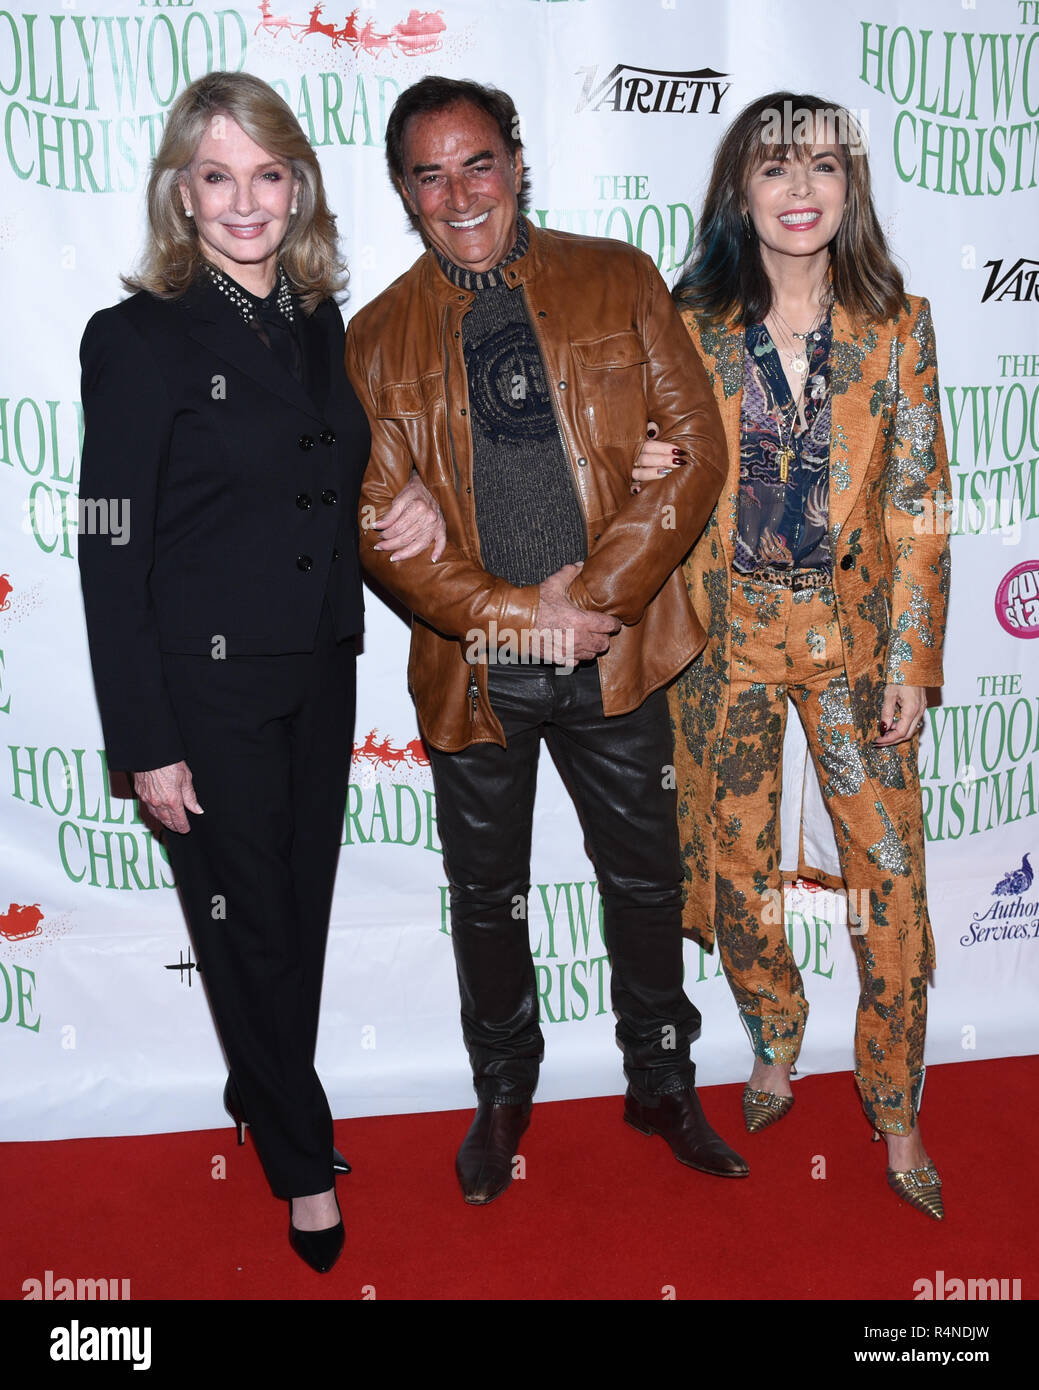 Deidre Hall, Thaao Penghlis and Lauren Koslow arrives at the 87th Annual Hollywood Christmas Parade in Hollywood California on November 25, 2018. Stock Photo